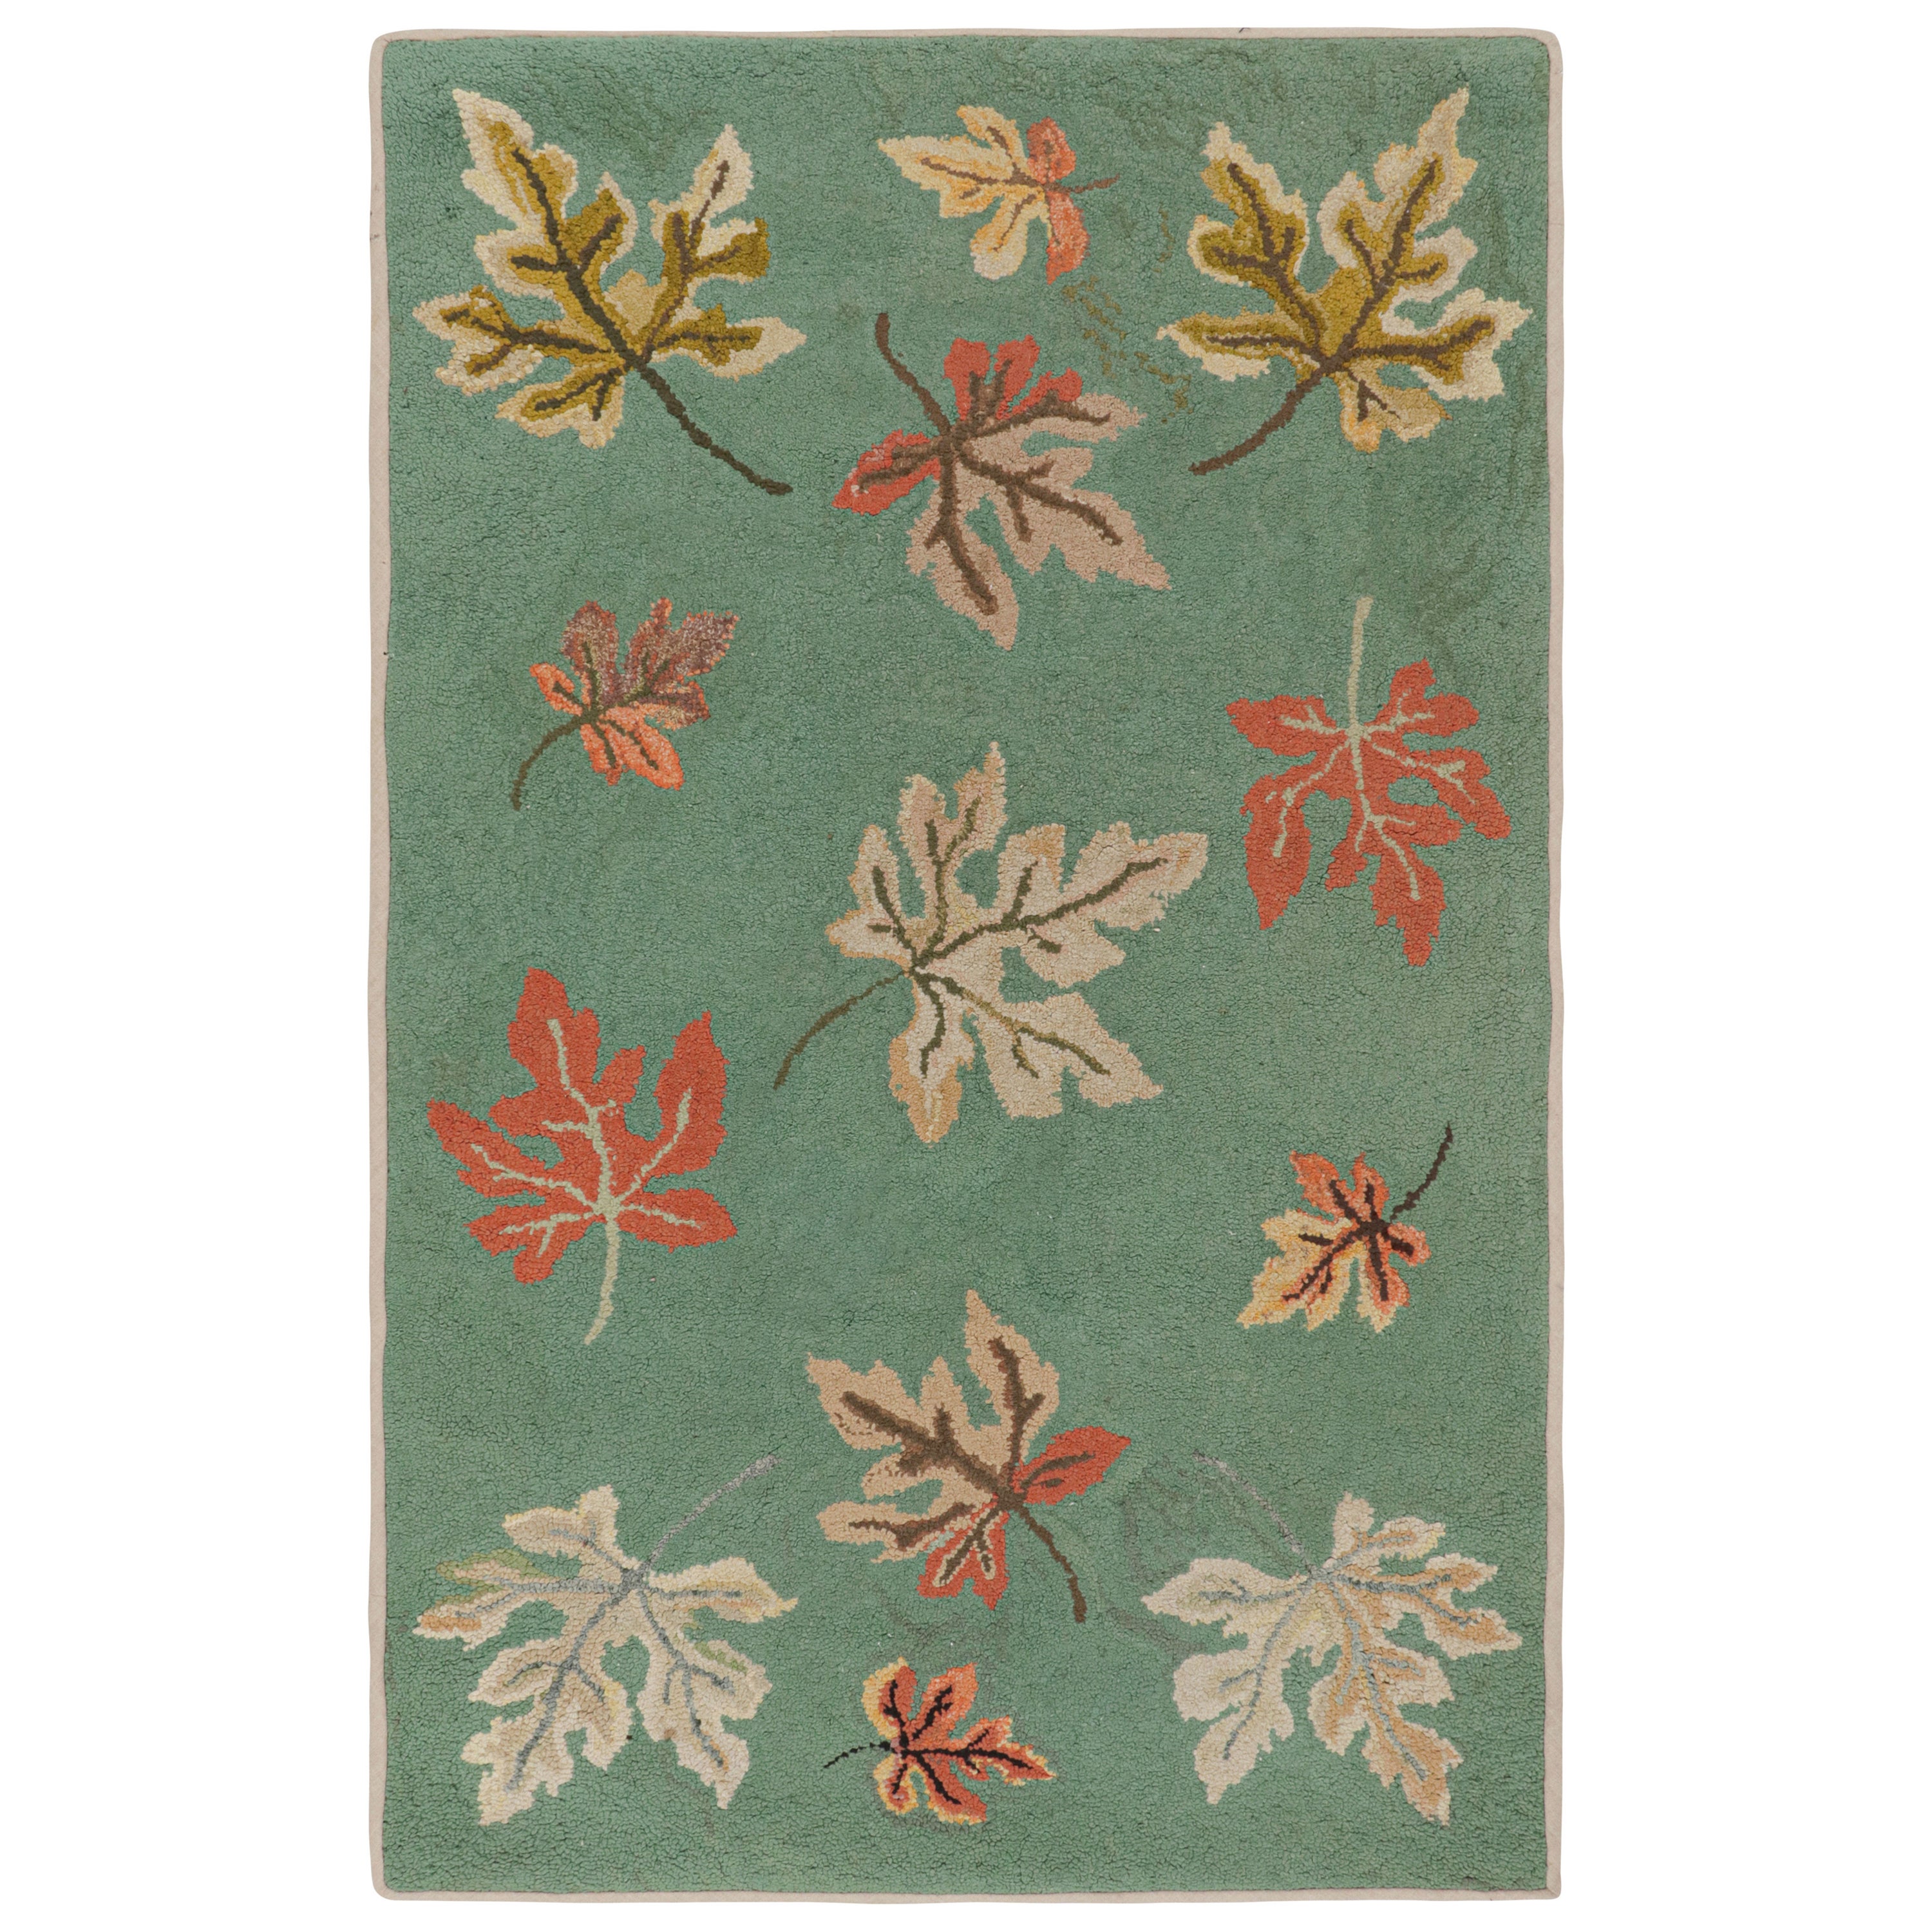 Antique Hooked Rug in Seafoam with Leaf Floral Patterns, from Rug & Kilim For Sale